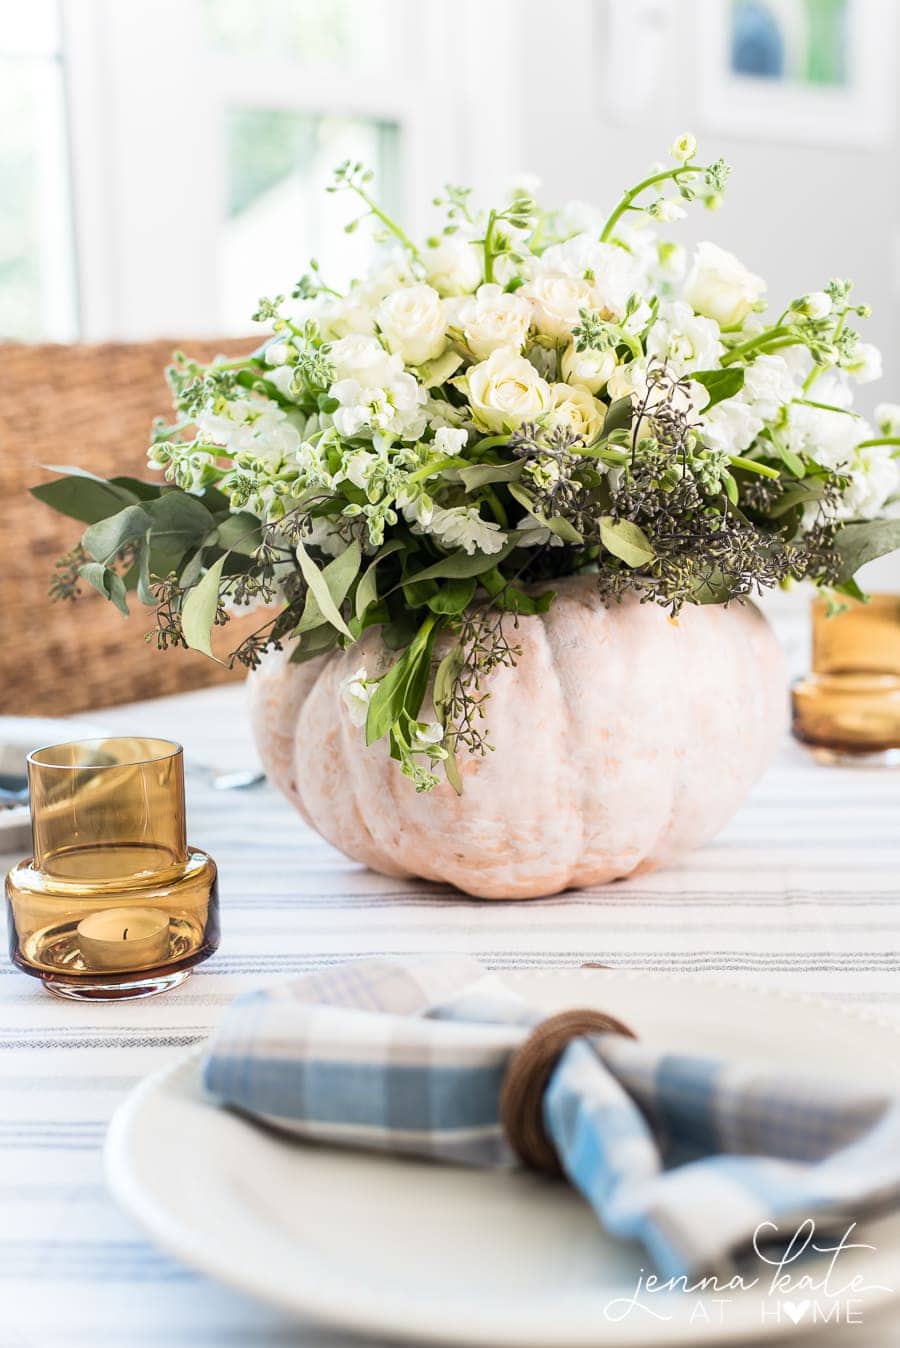 Creating a fall centerpiece with fresh flowers and a pumpkin